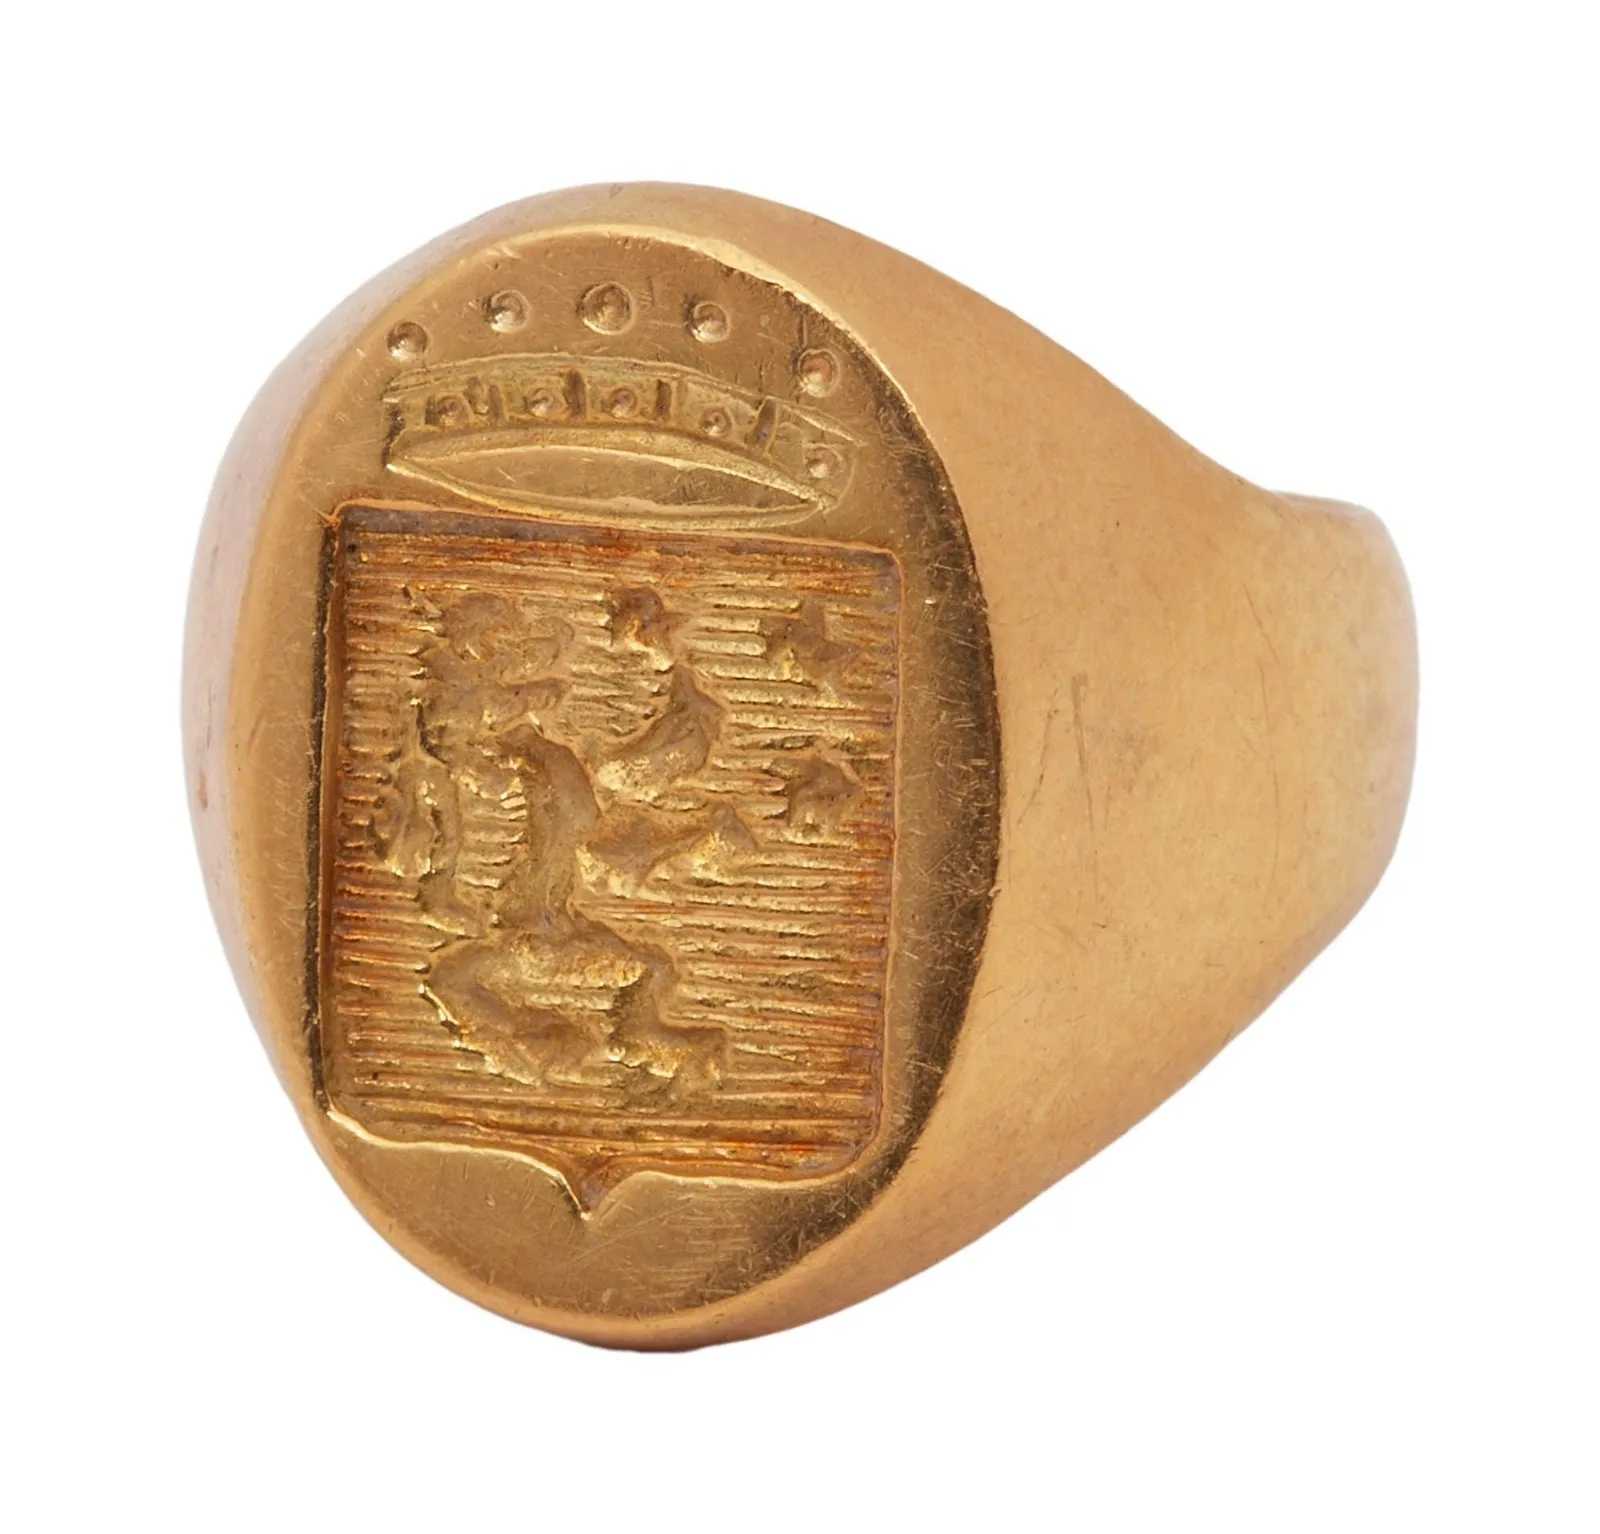 Tony Bennett's Sinatra Family Crest Signet Ring, which sold for $50,000 ($65,000 with buyer’s premium) at Julien's.